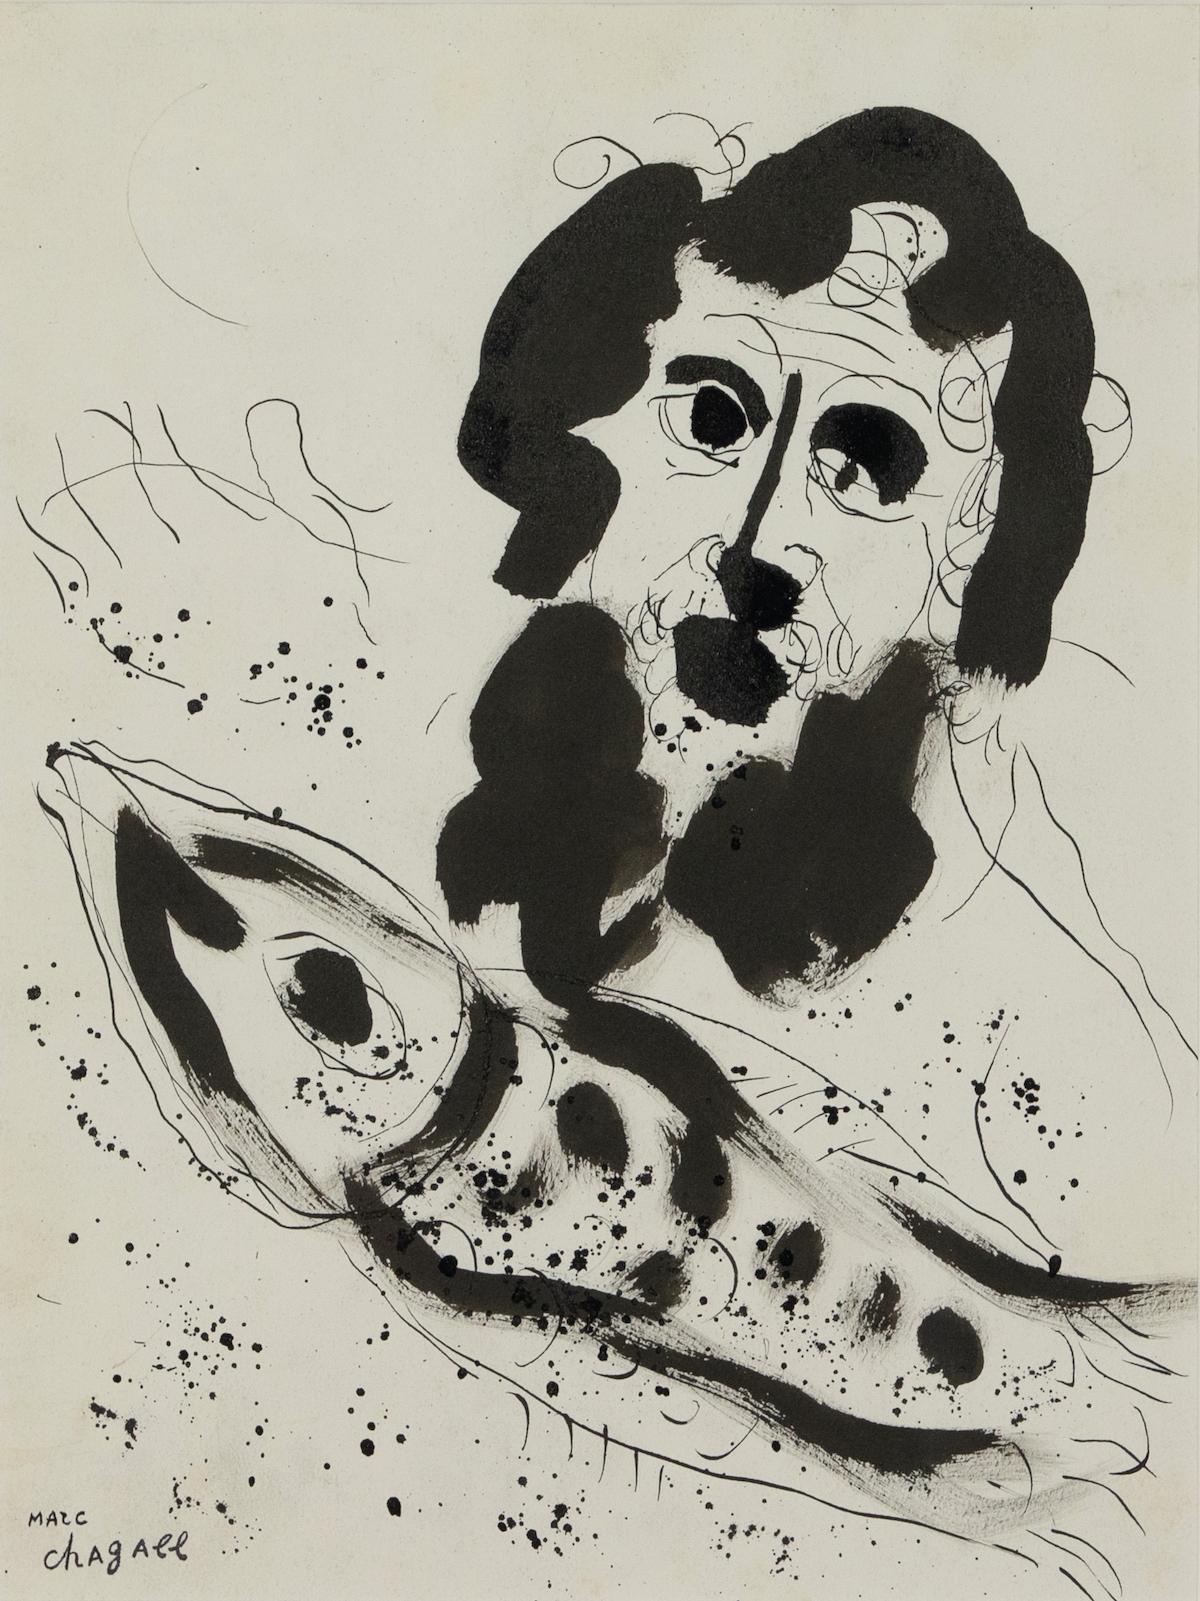 *PLEASE NOTE UK BUYERS WILL ONLY PAY 5% VAT ON THIS PURCHASE.

Jonas by Marc Chagall (1887-1985)
Indian ink on paper
35.6 x 26.9 cm (14 x 10 ⅝ inches)
Signed with Estate stamp lower left, Marc Chagall
Executed in 1958-59

This was a preliminary work